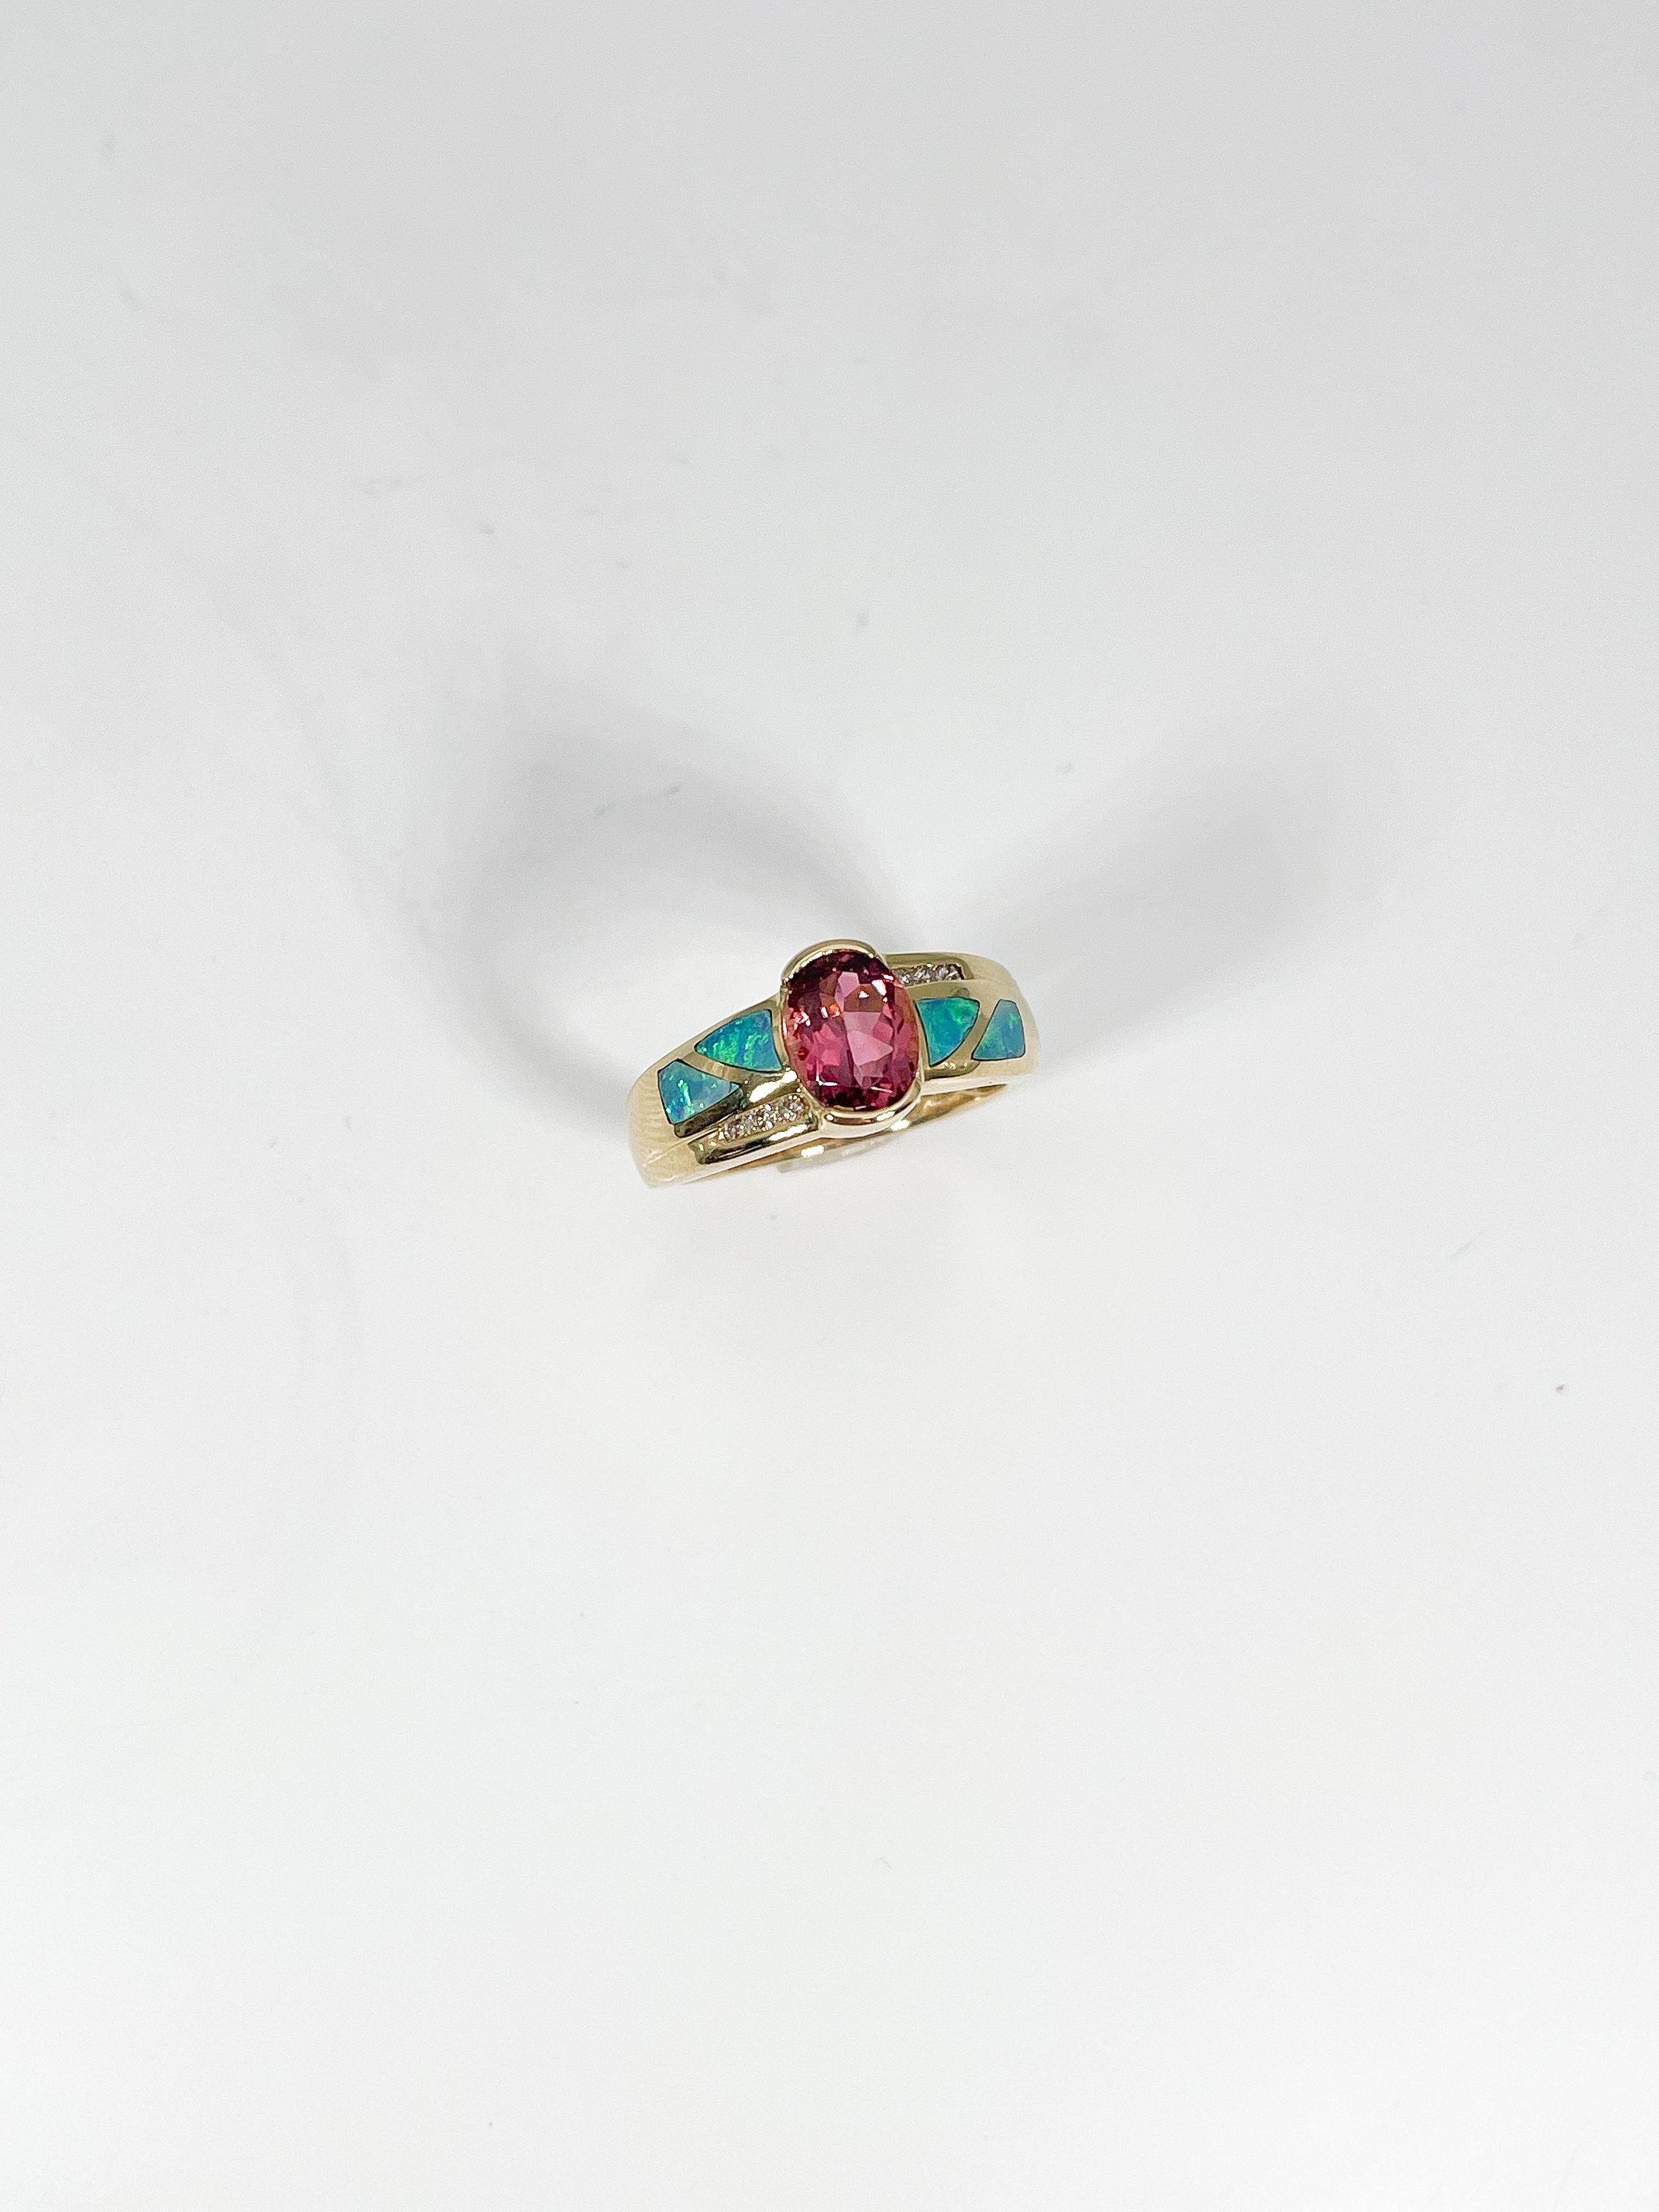 14k yellow gold fashion ring with a pink tourmaline center stone along with opal and diamond accents. The measurement of the center stone is 8.8 x 5.6 mm, and the ring has a total weight of 4.41 grams.